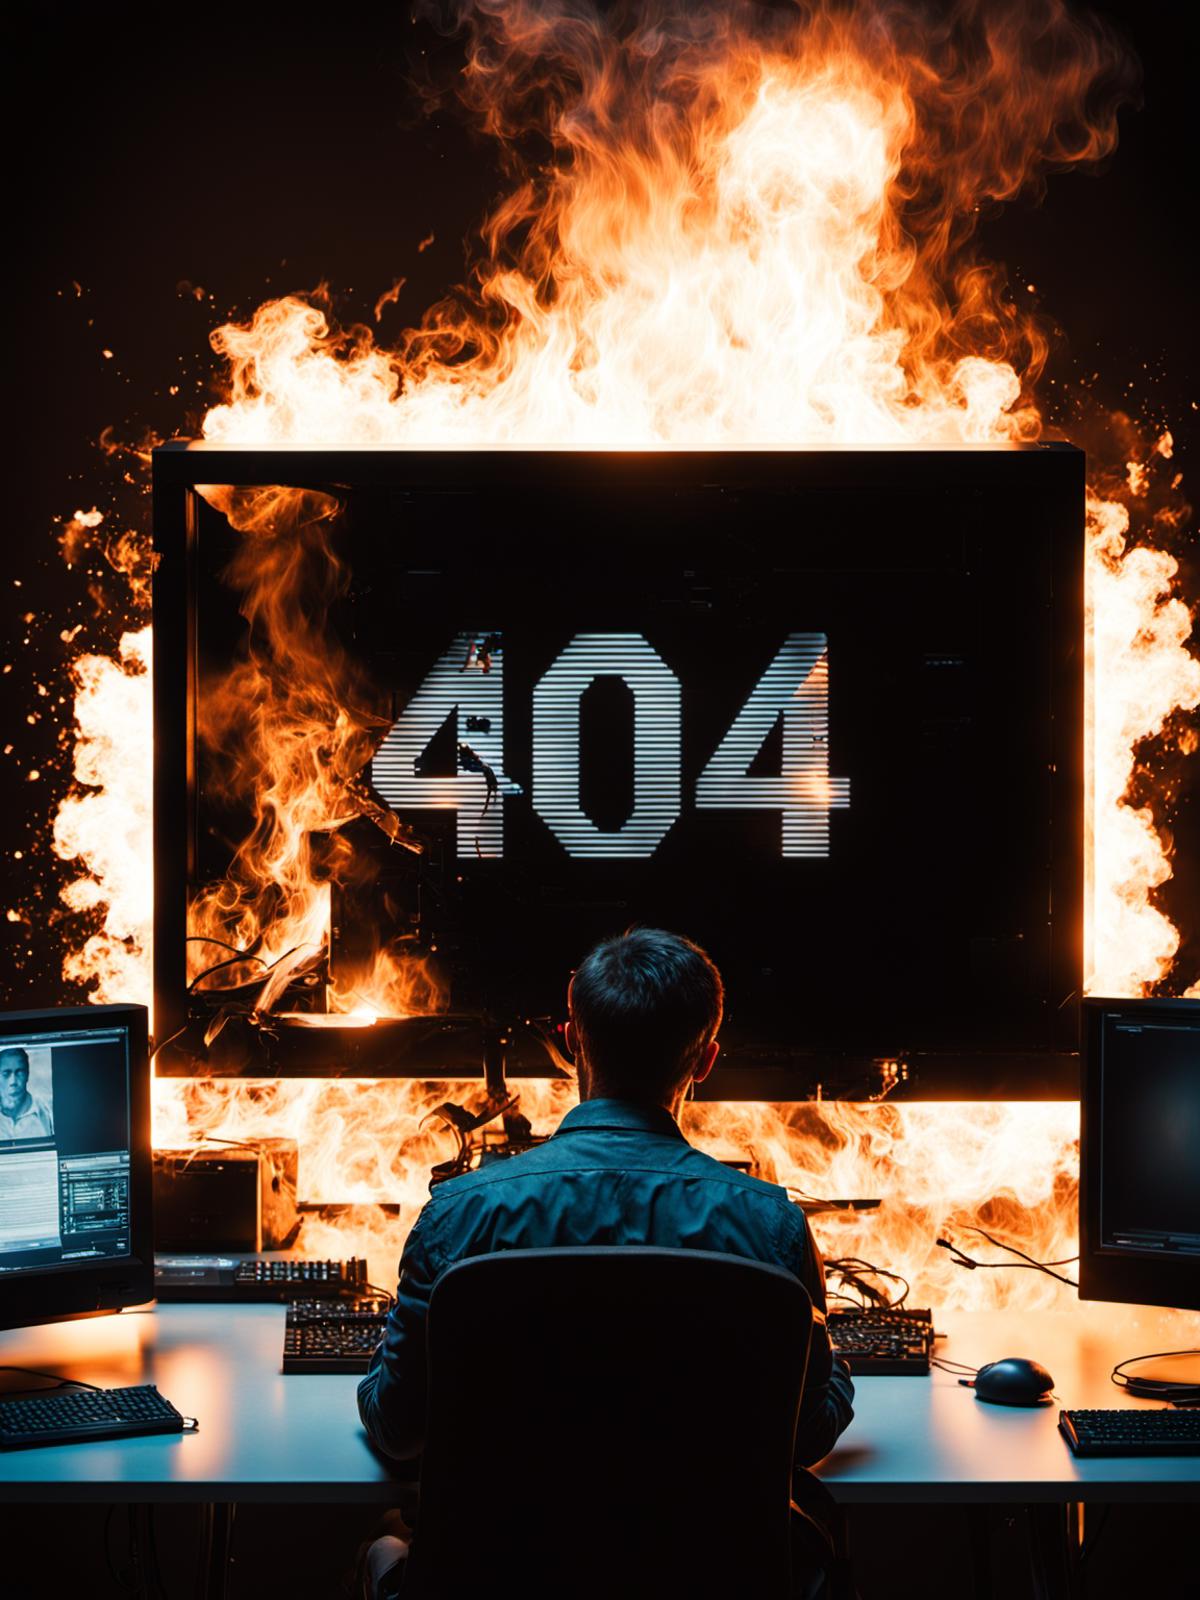 A man sitting in front of a computer monitor that is displaying the number 404 with a fire effect and flames around the screen.